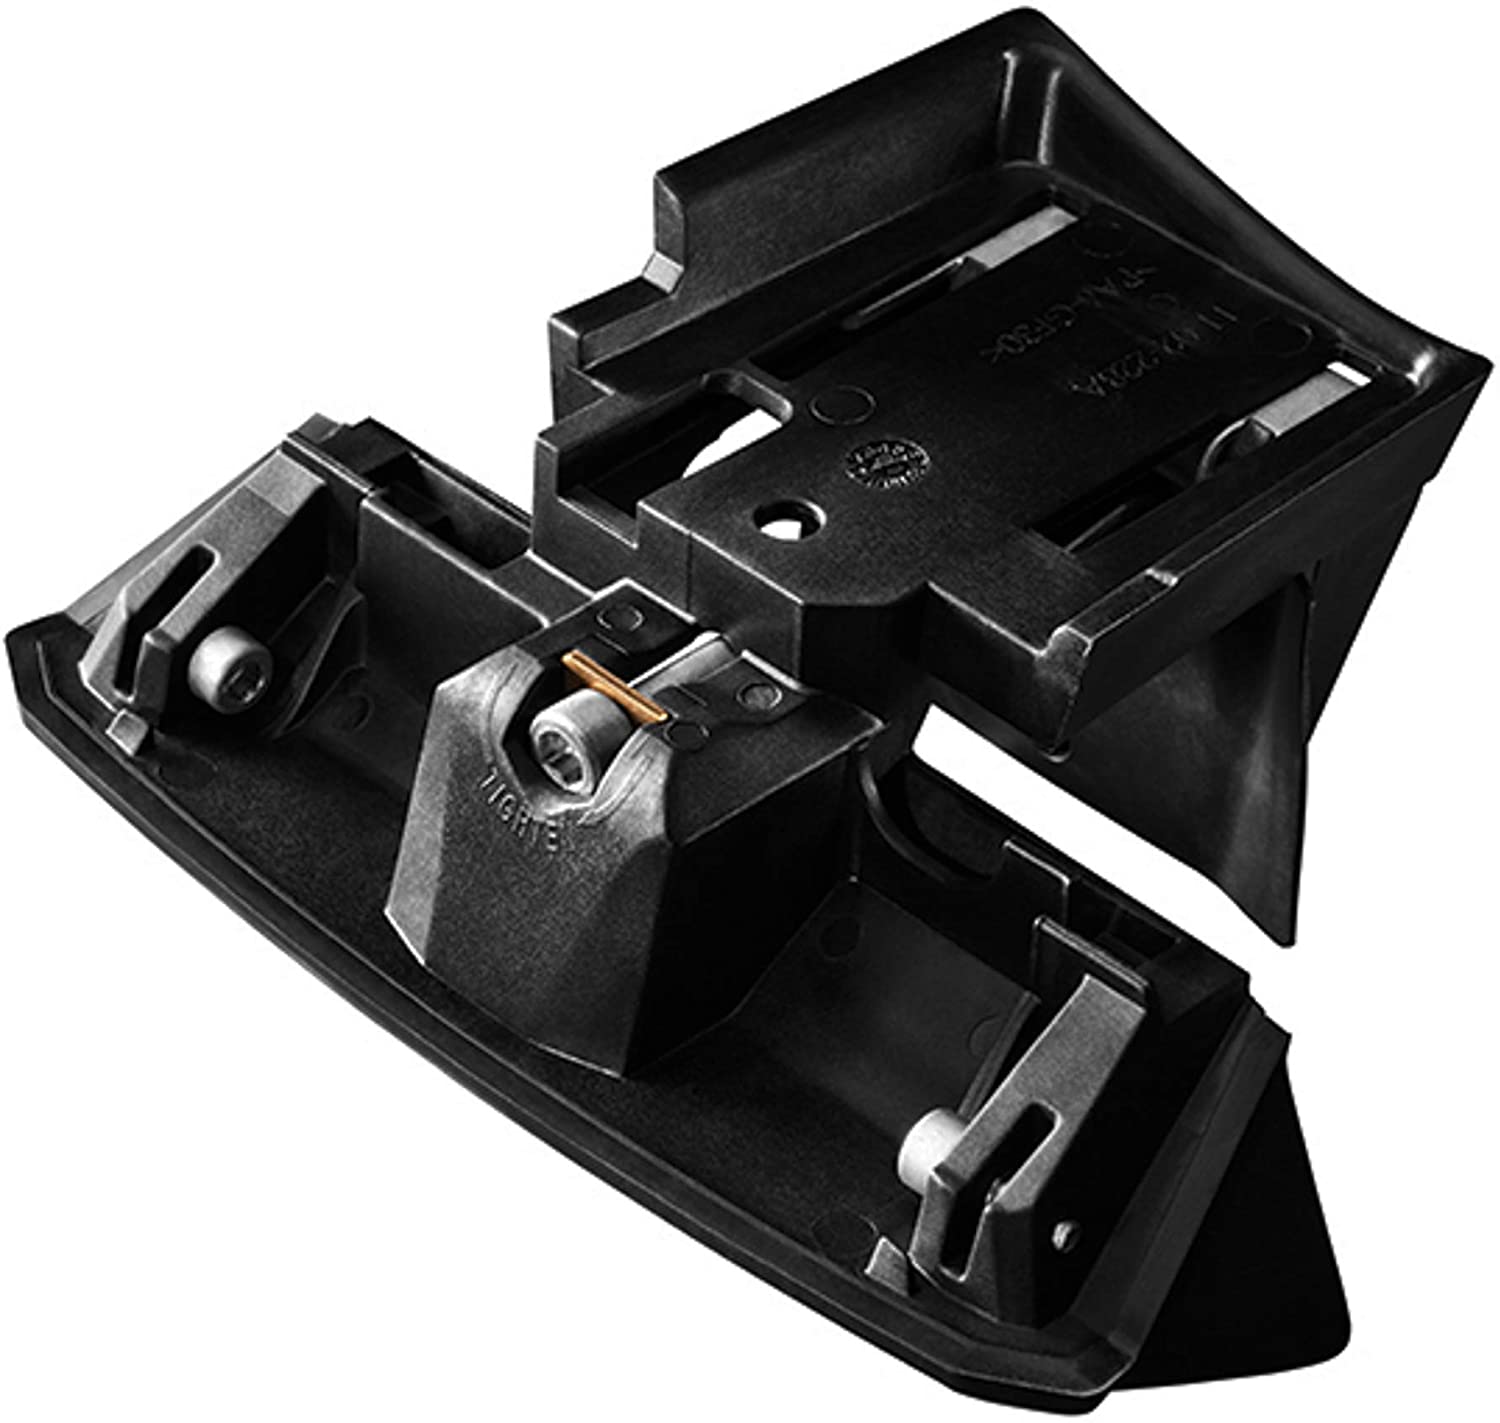 Yakima - K328 Fitting Kit, Raised Rail, Integrated Installation for Vehicles with Factory Raised Side Rails